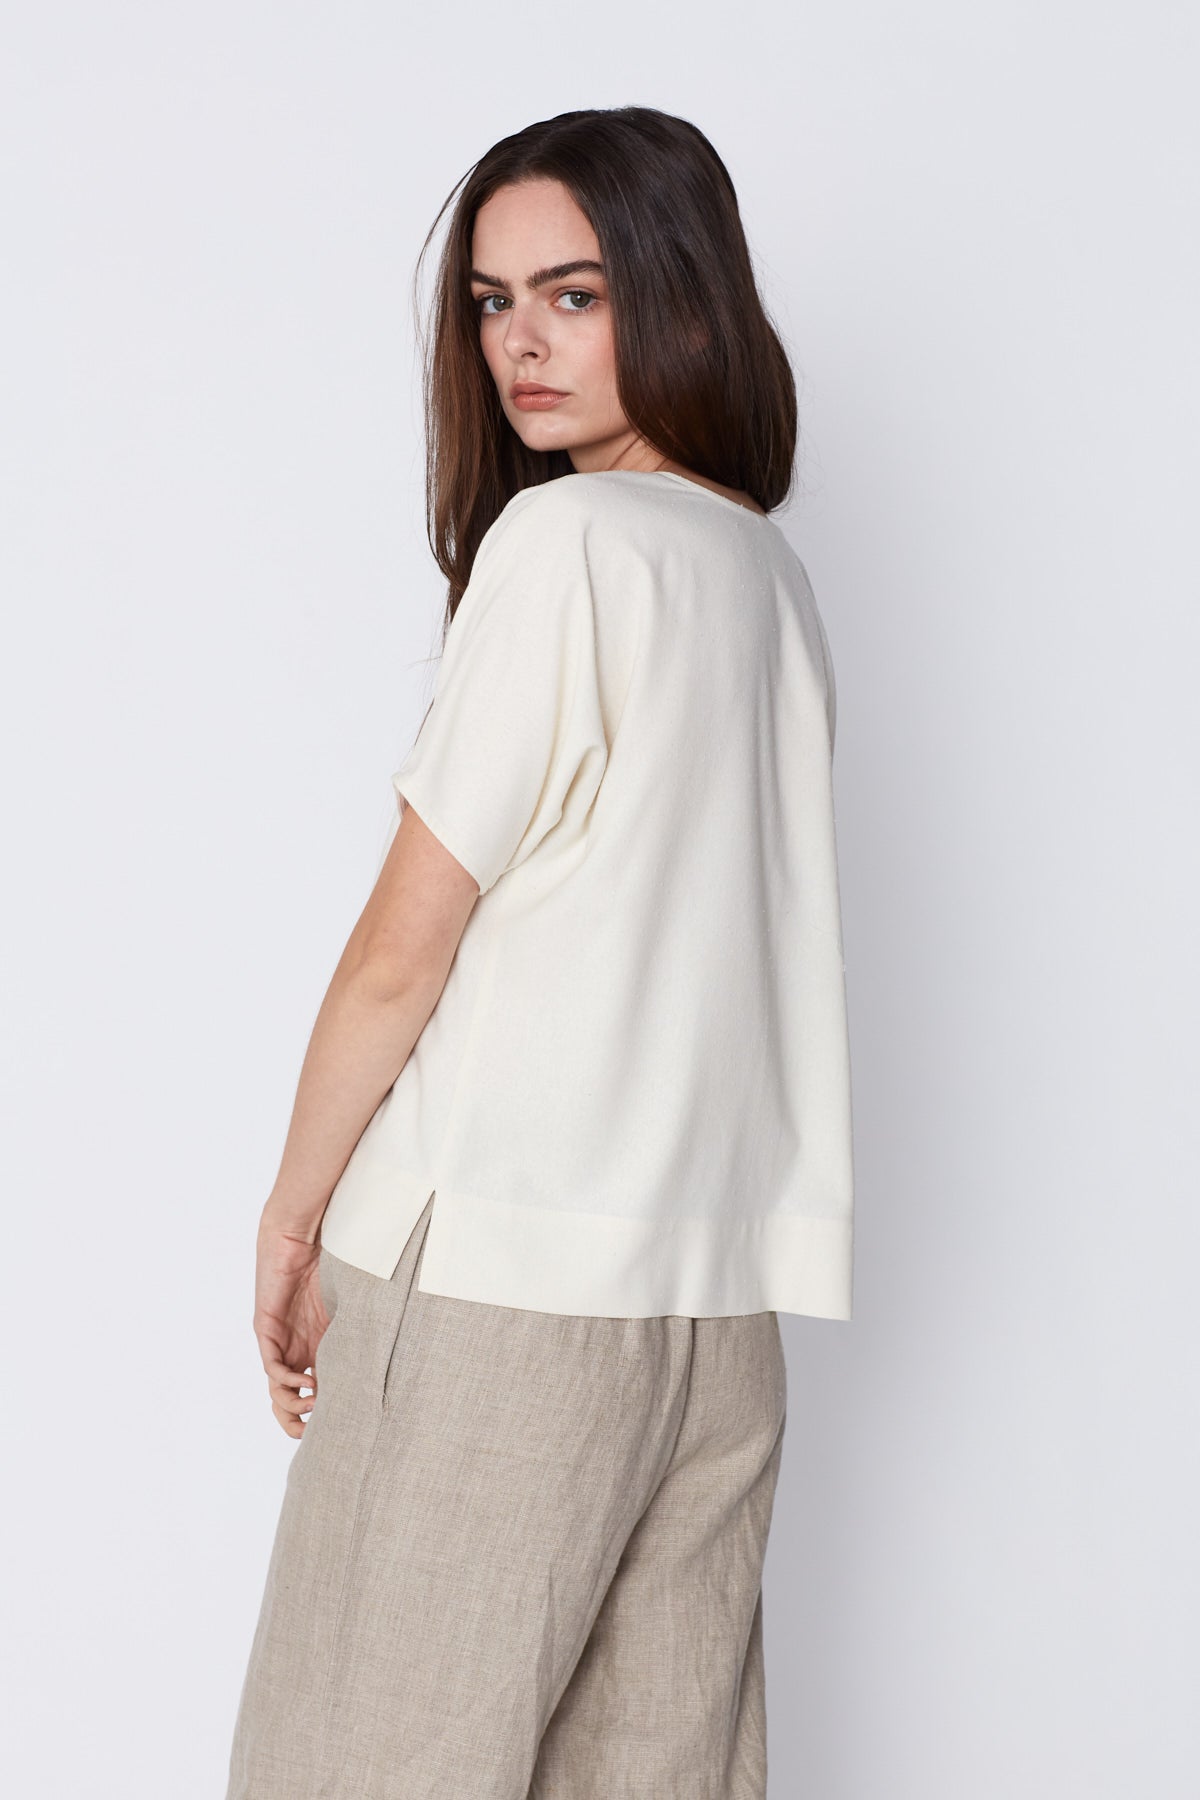 Lane Top in Cream Raw Silk. Made in Atlanta, ethically and sustainably, by slow fashion designer Megan Huntz. 